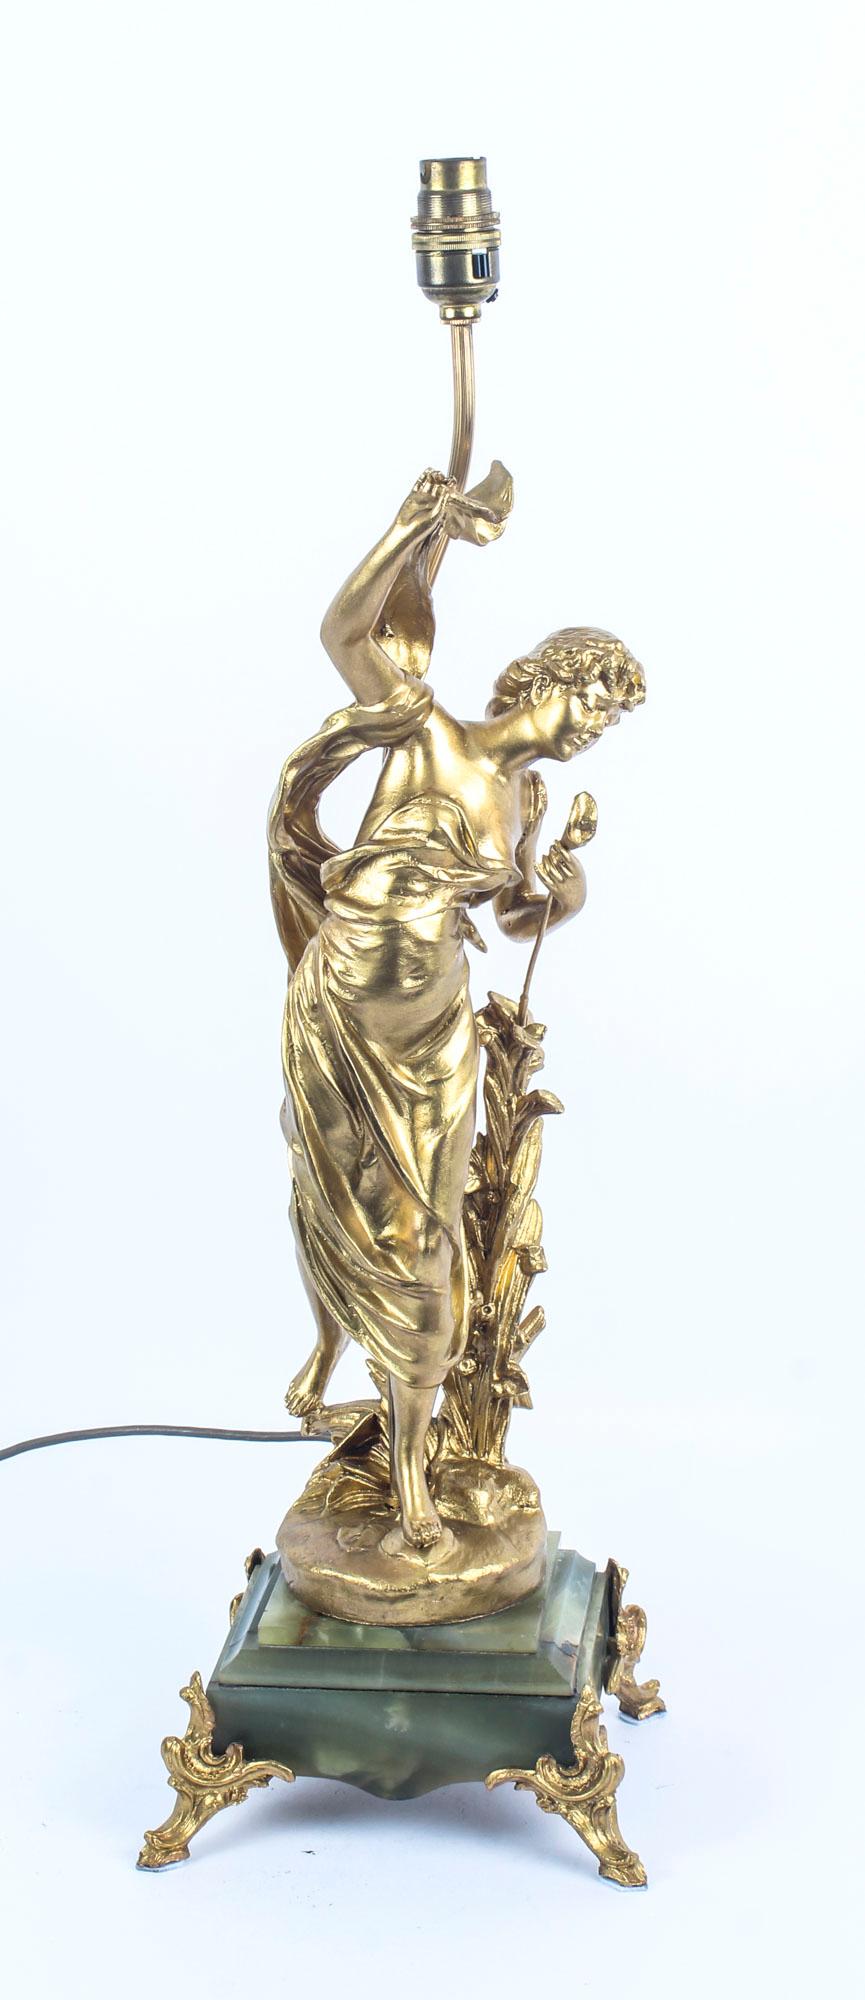 This is a beautiful antique Art Nouveau gilt metal and onyx table lamp of a beautiful lady, circa 1910 in date.

The lamp features a standing lady dressed in classical attire and holding a flower in one hand, she is raised on a green onyx base